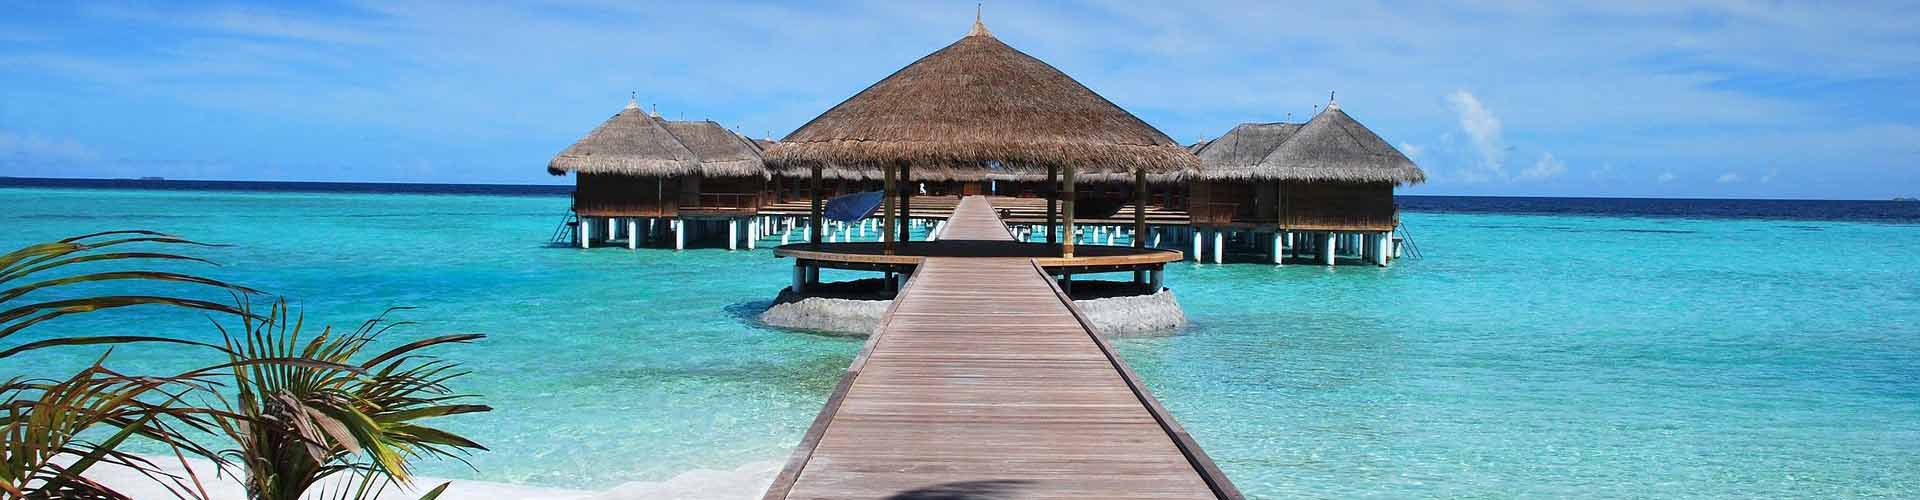 Dwell in an overwater bungalow